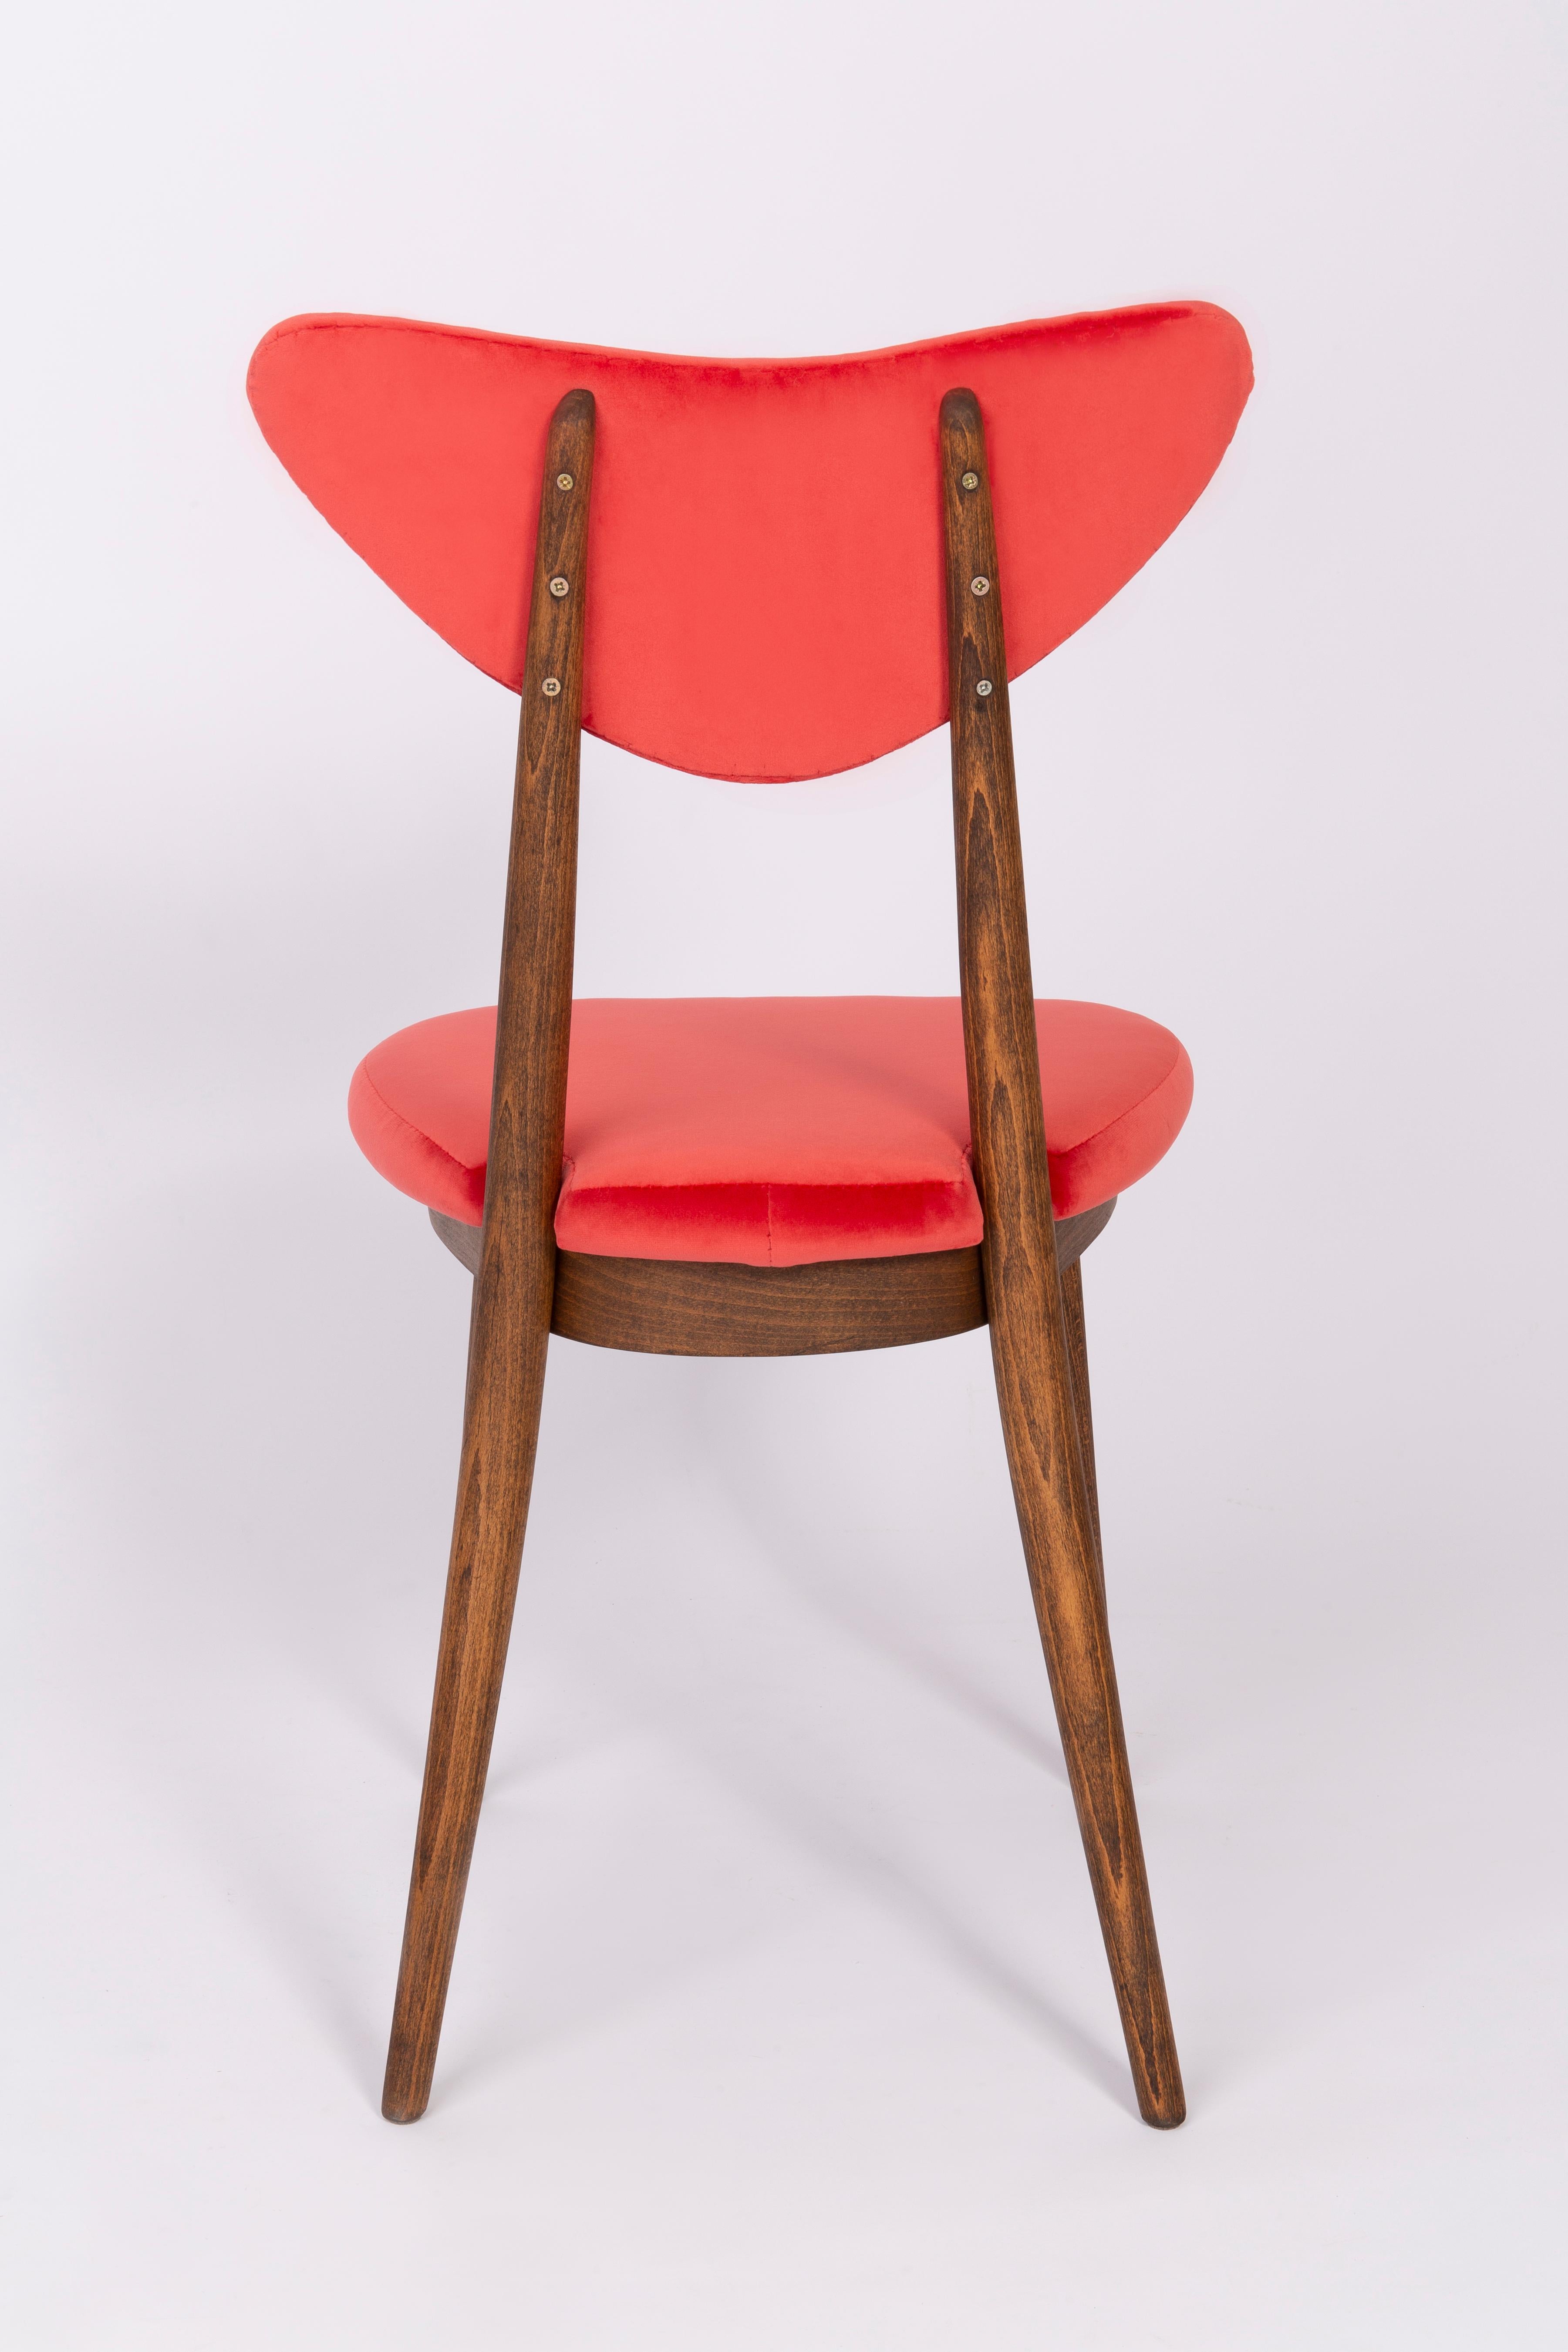 Velvet Set of Two Red Heart Chairs, Poland, 1960s For Sale